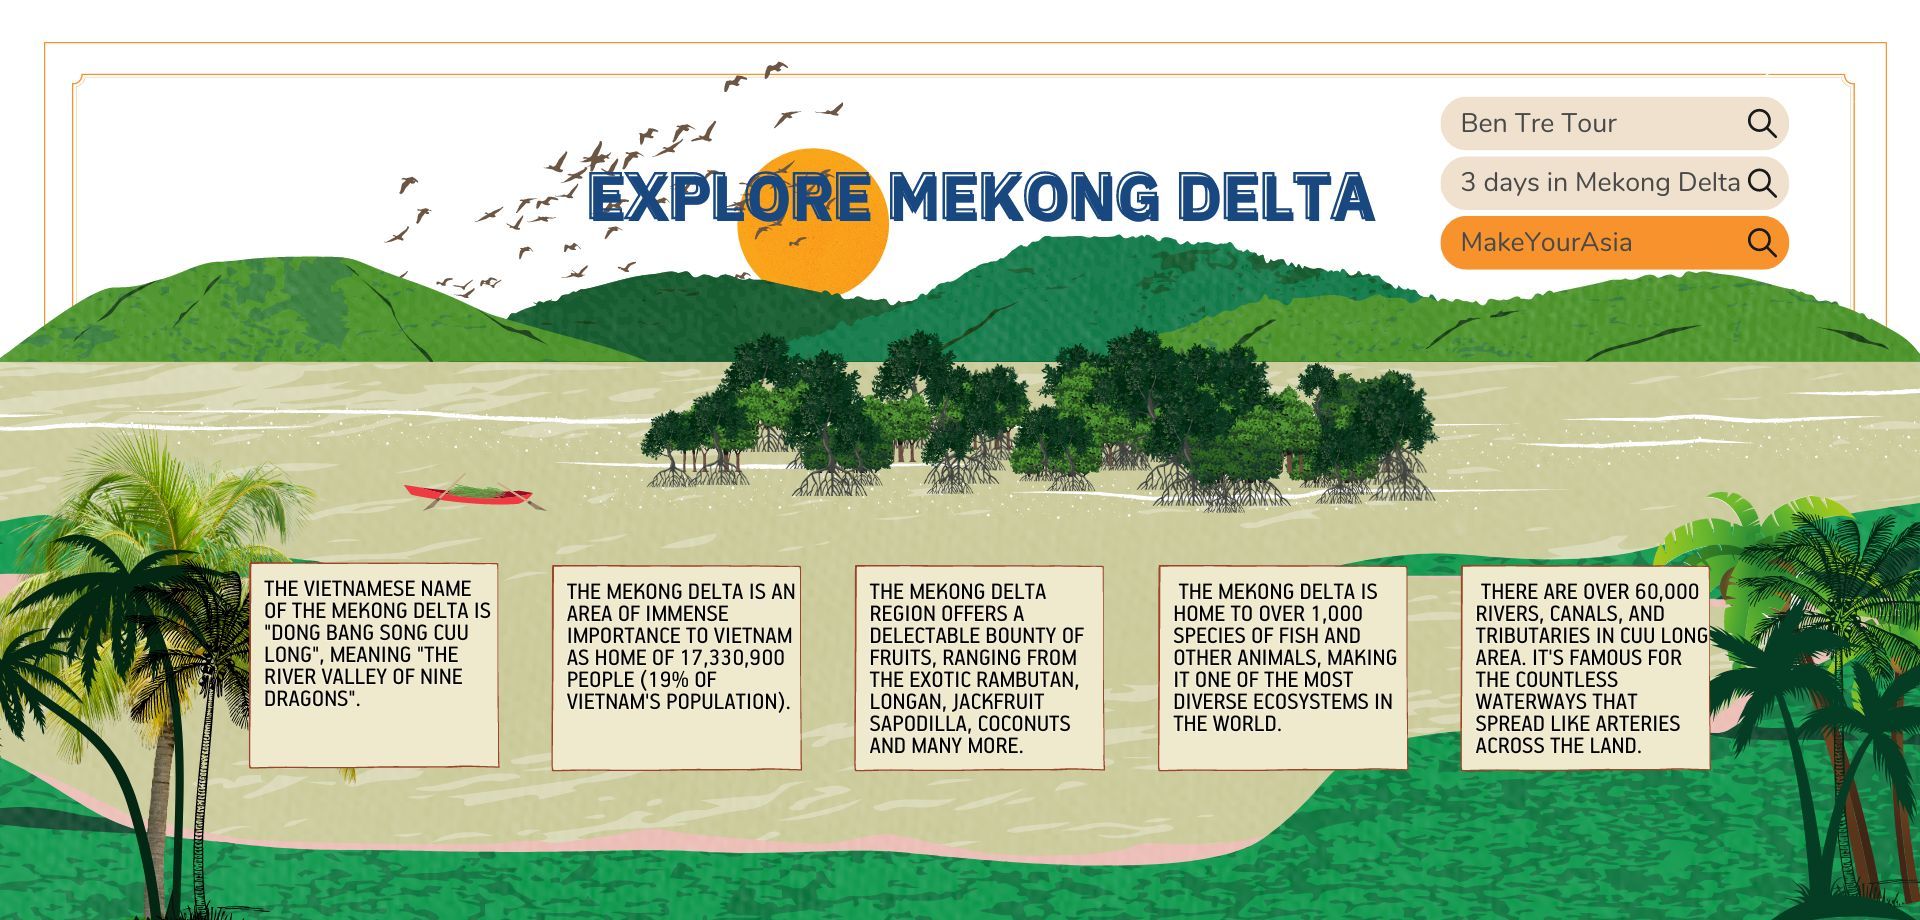 Facts about Mekong Delta